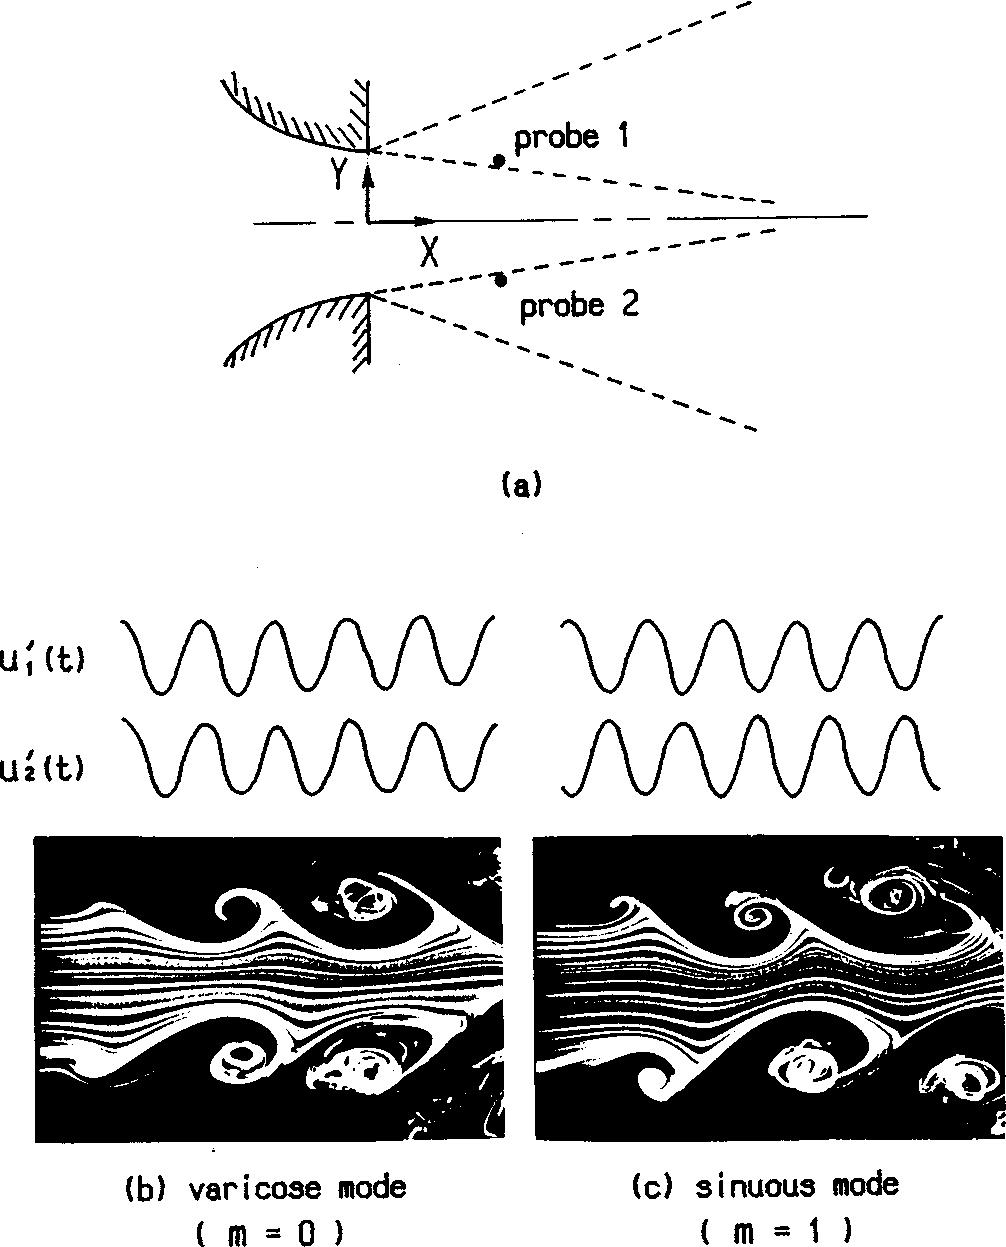 Phys. Fluids, Vol. 11, No. 7, July 1999 Mode development in the developing region of a plane jet 1849 FIG. 1. a Schematic representation of the jet flow field.